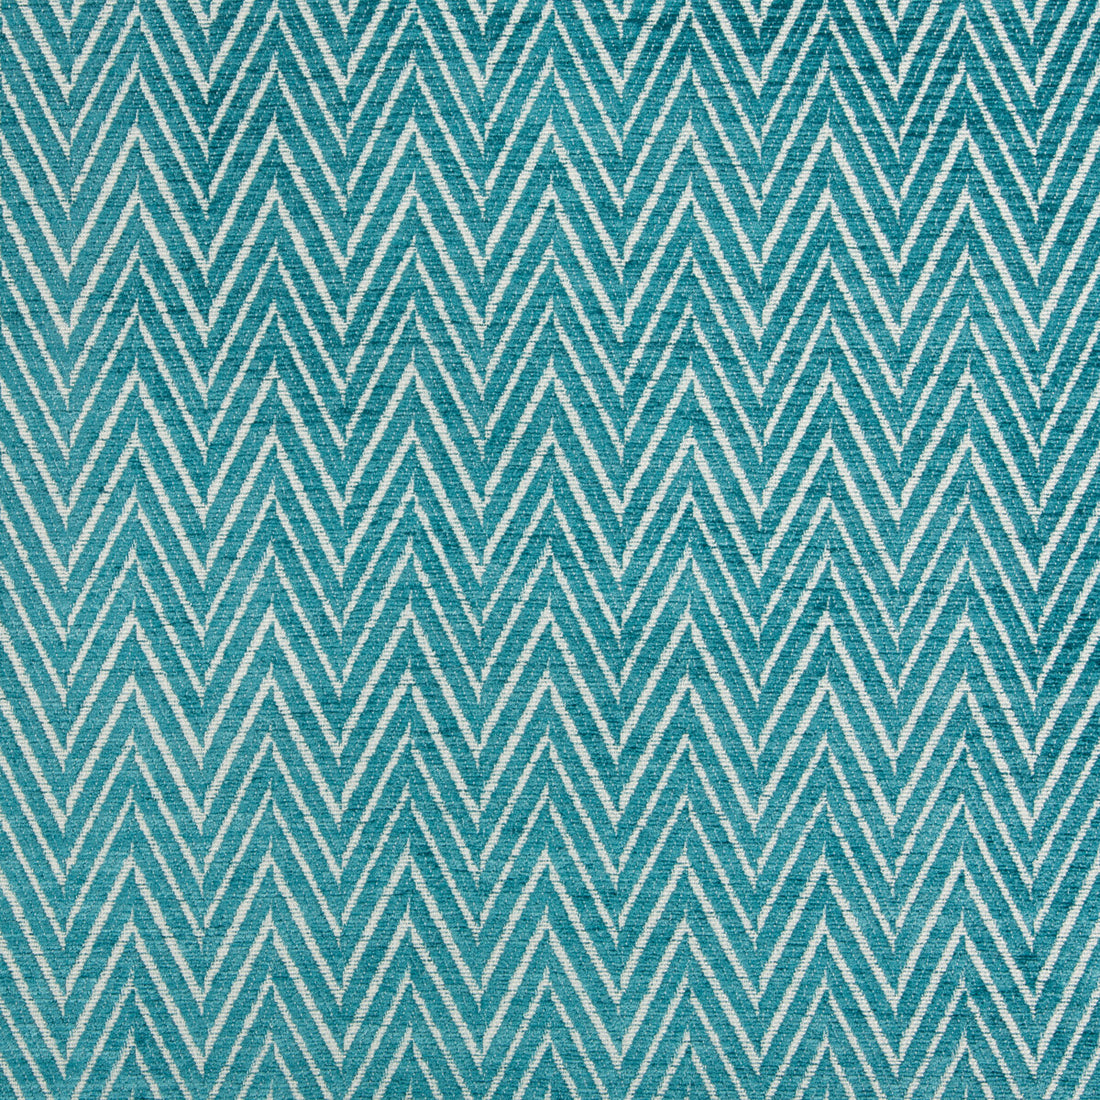 Kravet Design fabric in 34690-113 color - pattern 34690.113.0 - by Kravet Design in the Performance Crypton Home collection